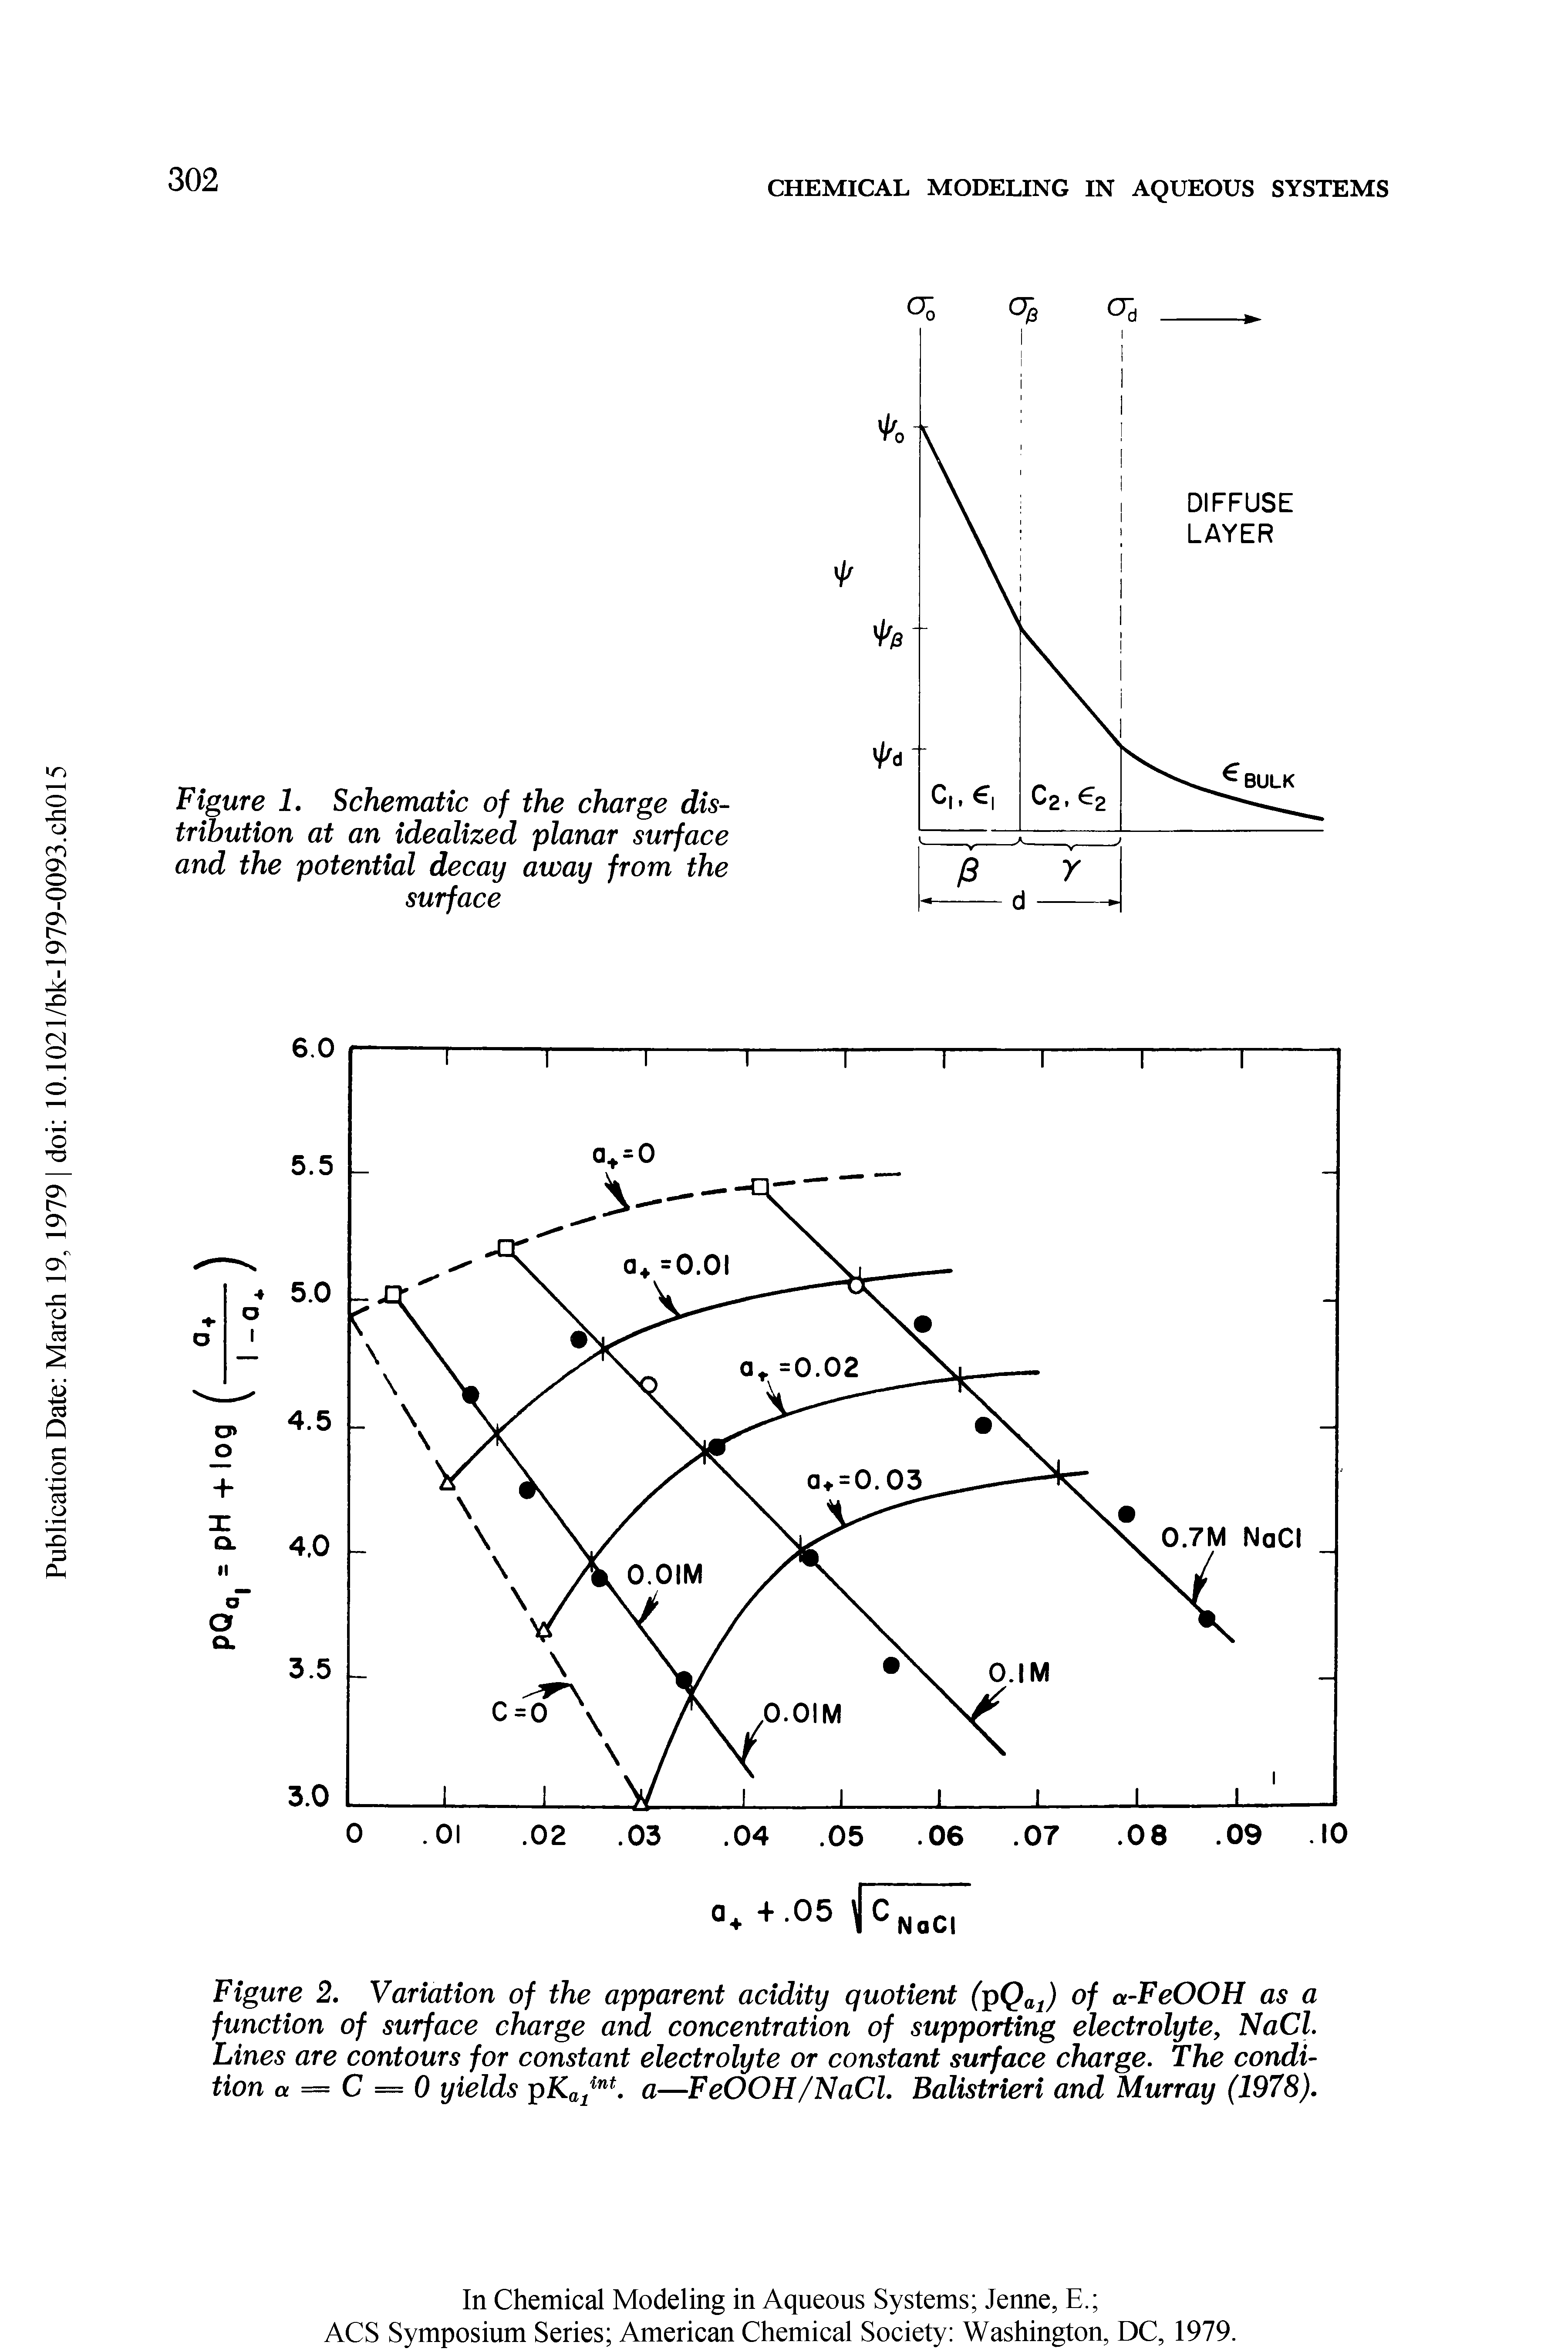 Figure 2. Variation of the apparent acidity quotient (pQai) of a-FeOOH as a function of surface charge and concentration of supporting electrolyte, NaCl. Lines are contours for constant electrolyte or constant surface charge. The condition a = C = 0 yields a—FeOOH/NaCl. Balistrieri and Murray (1978).